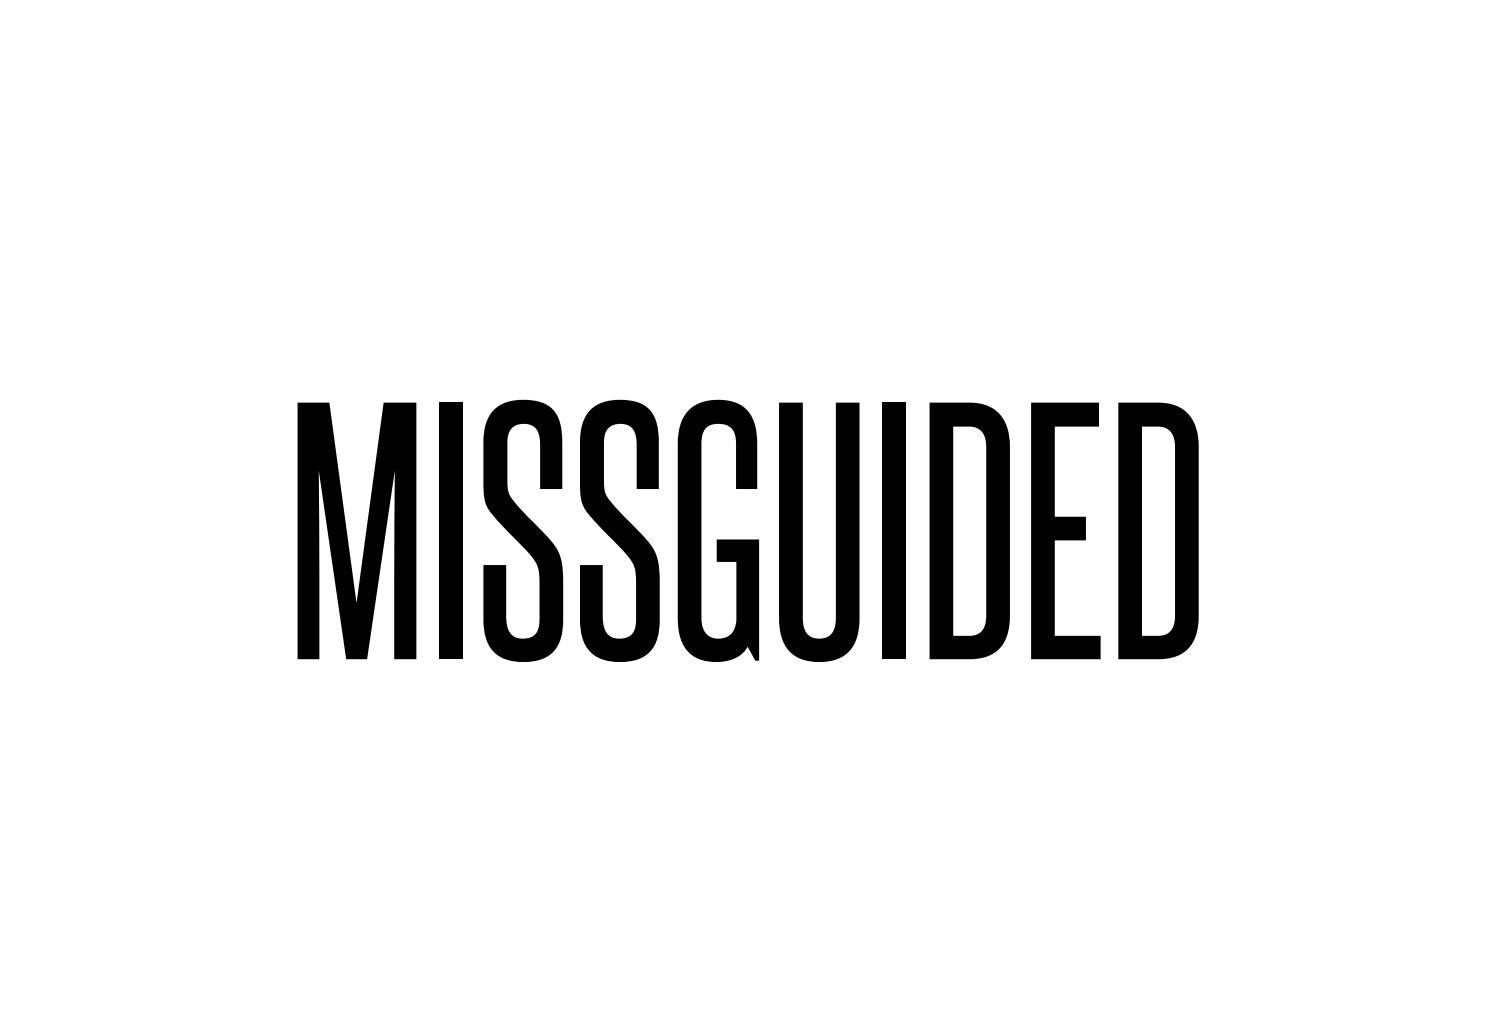 Missguided Coupons & Promo Codes